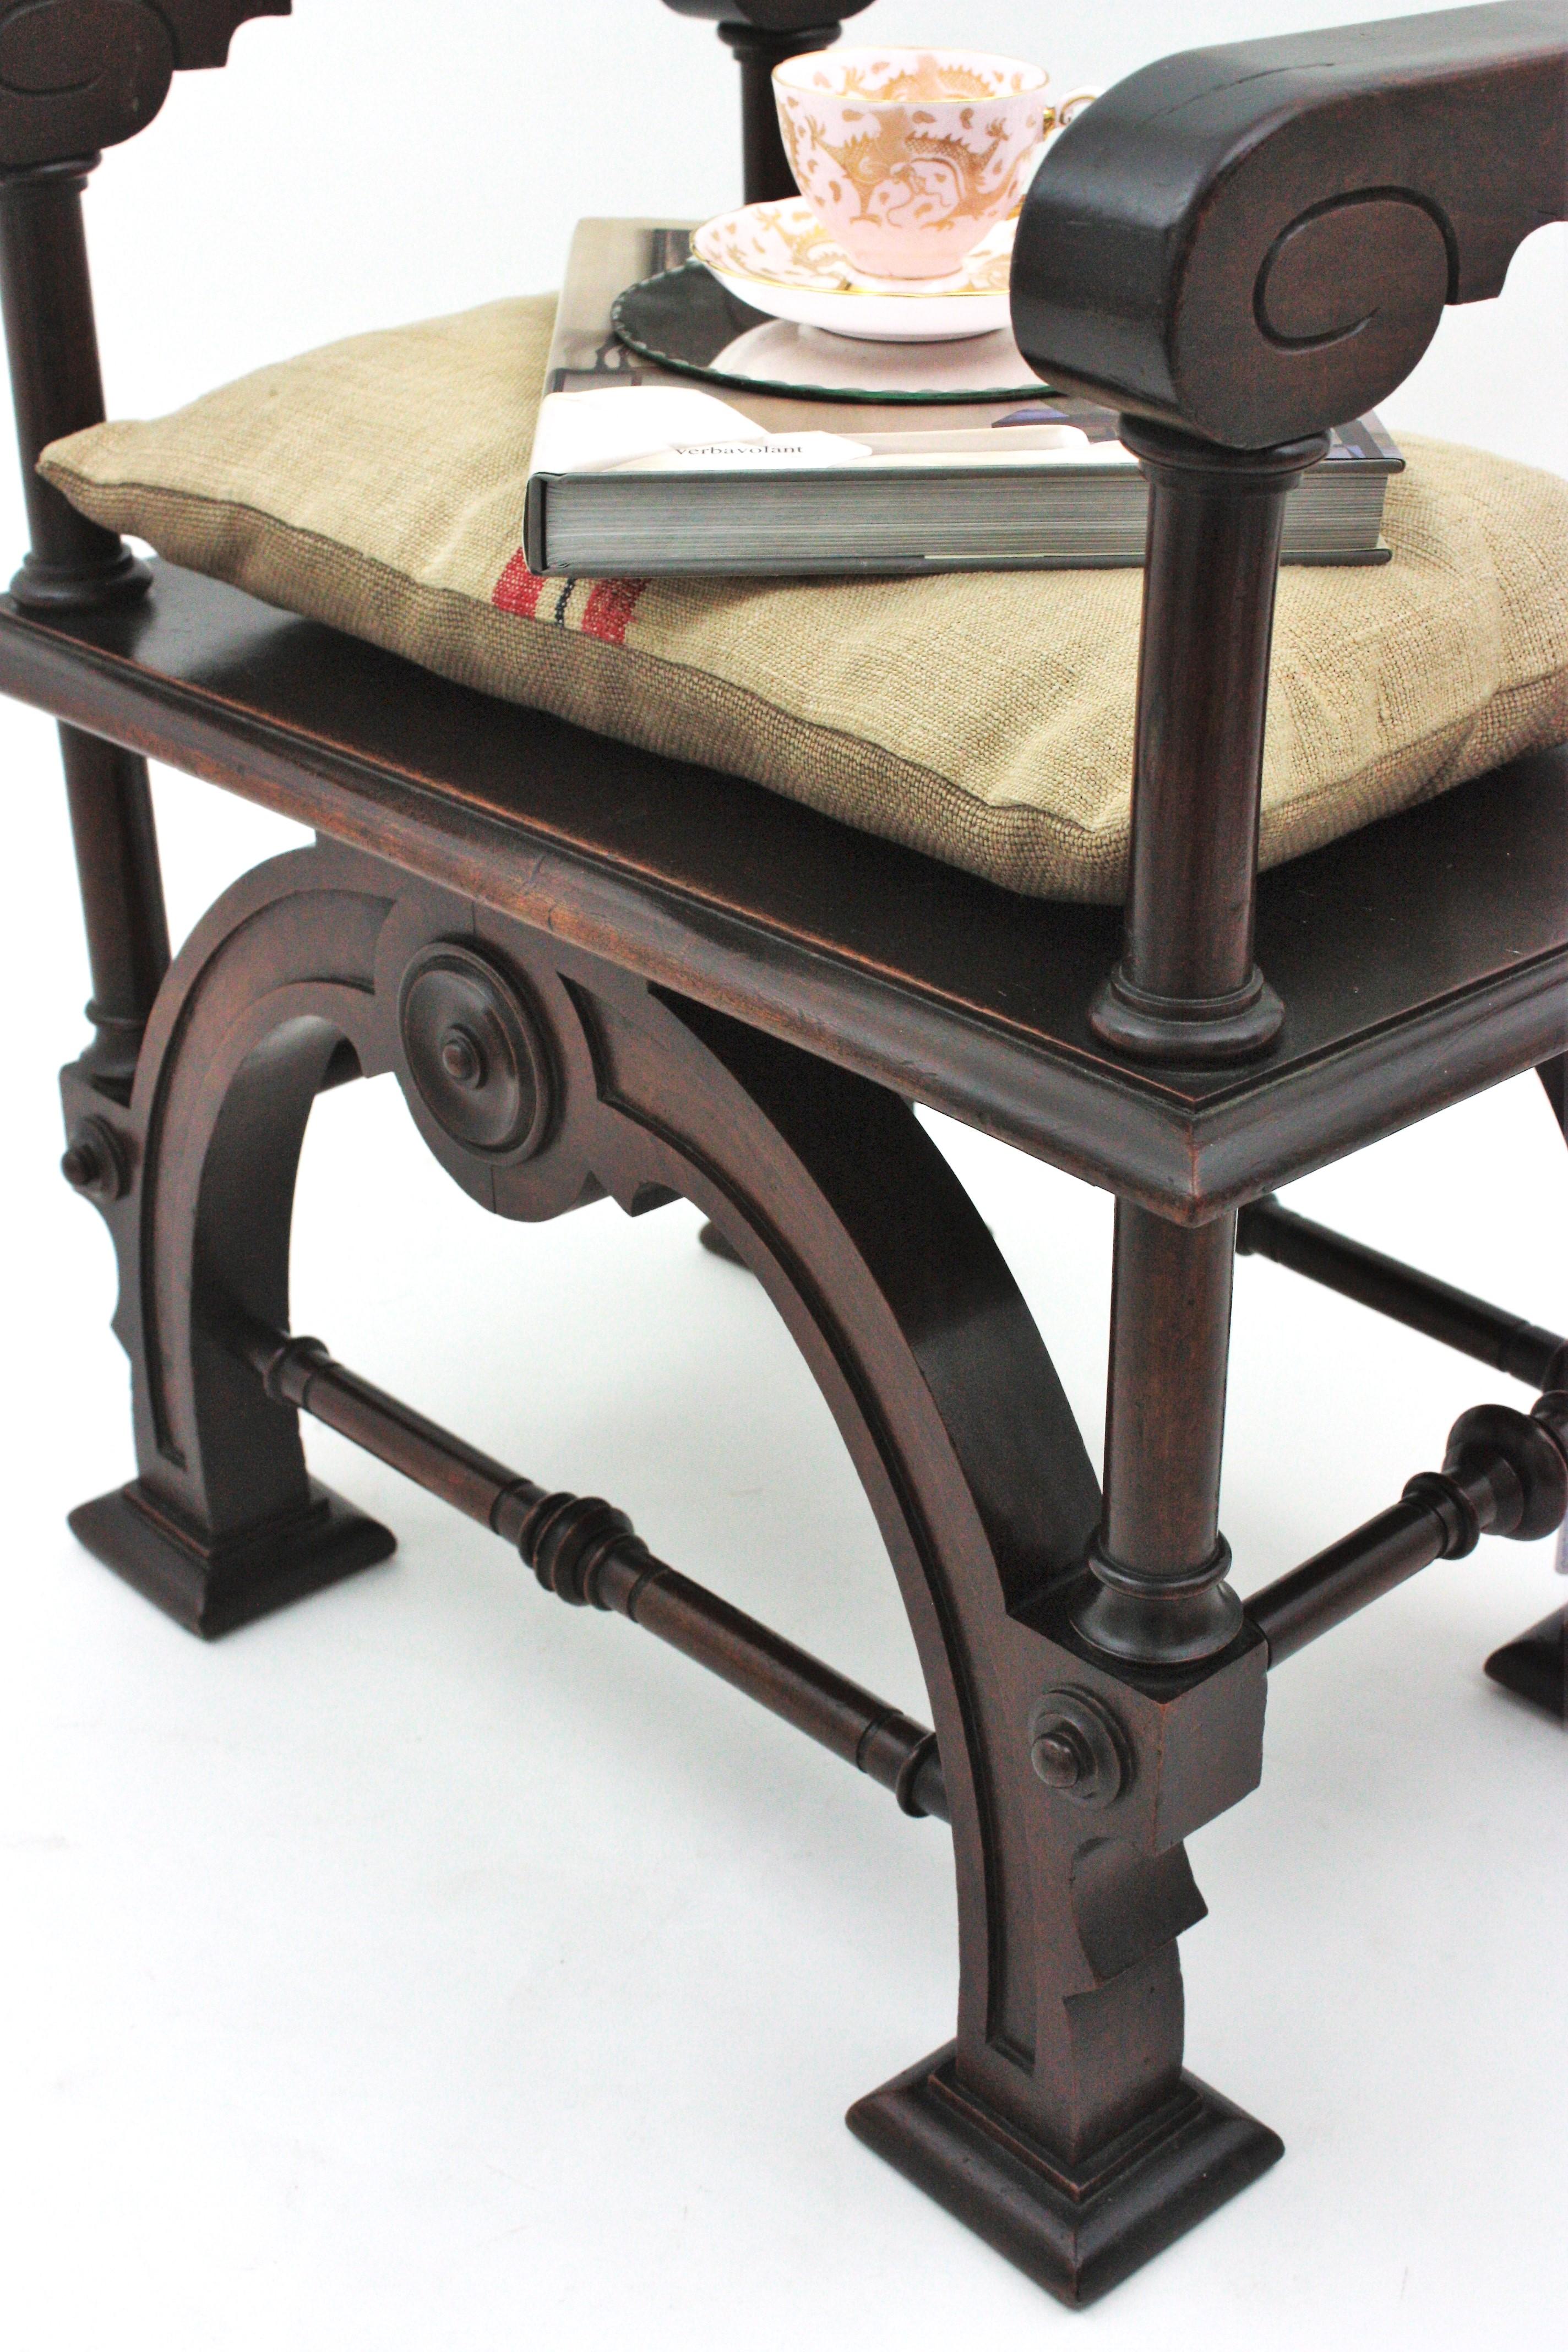 Spanish Revival Carved Stool or Bench in Walnut, 1940s For Sale 1